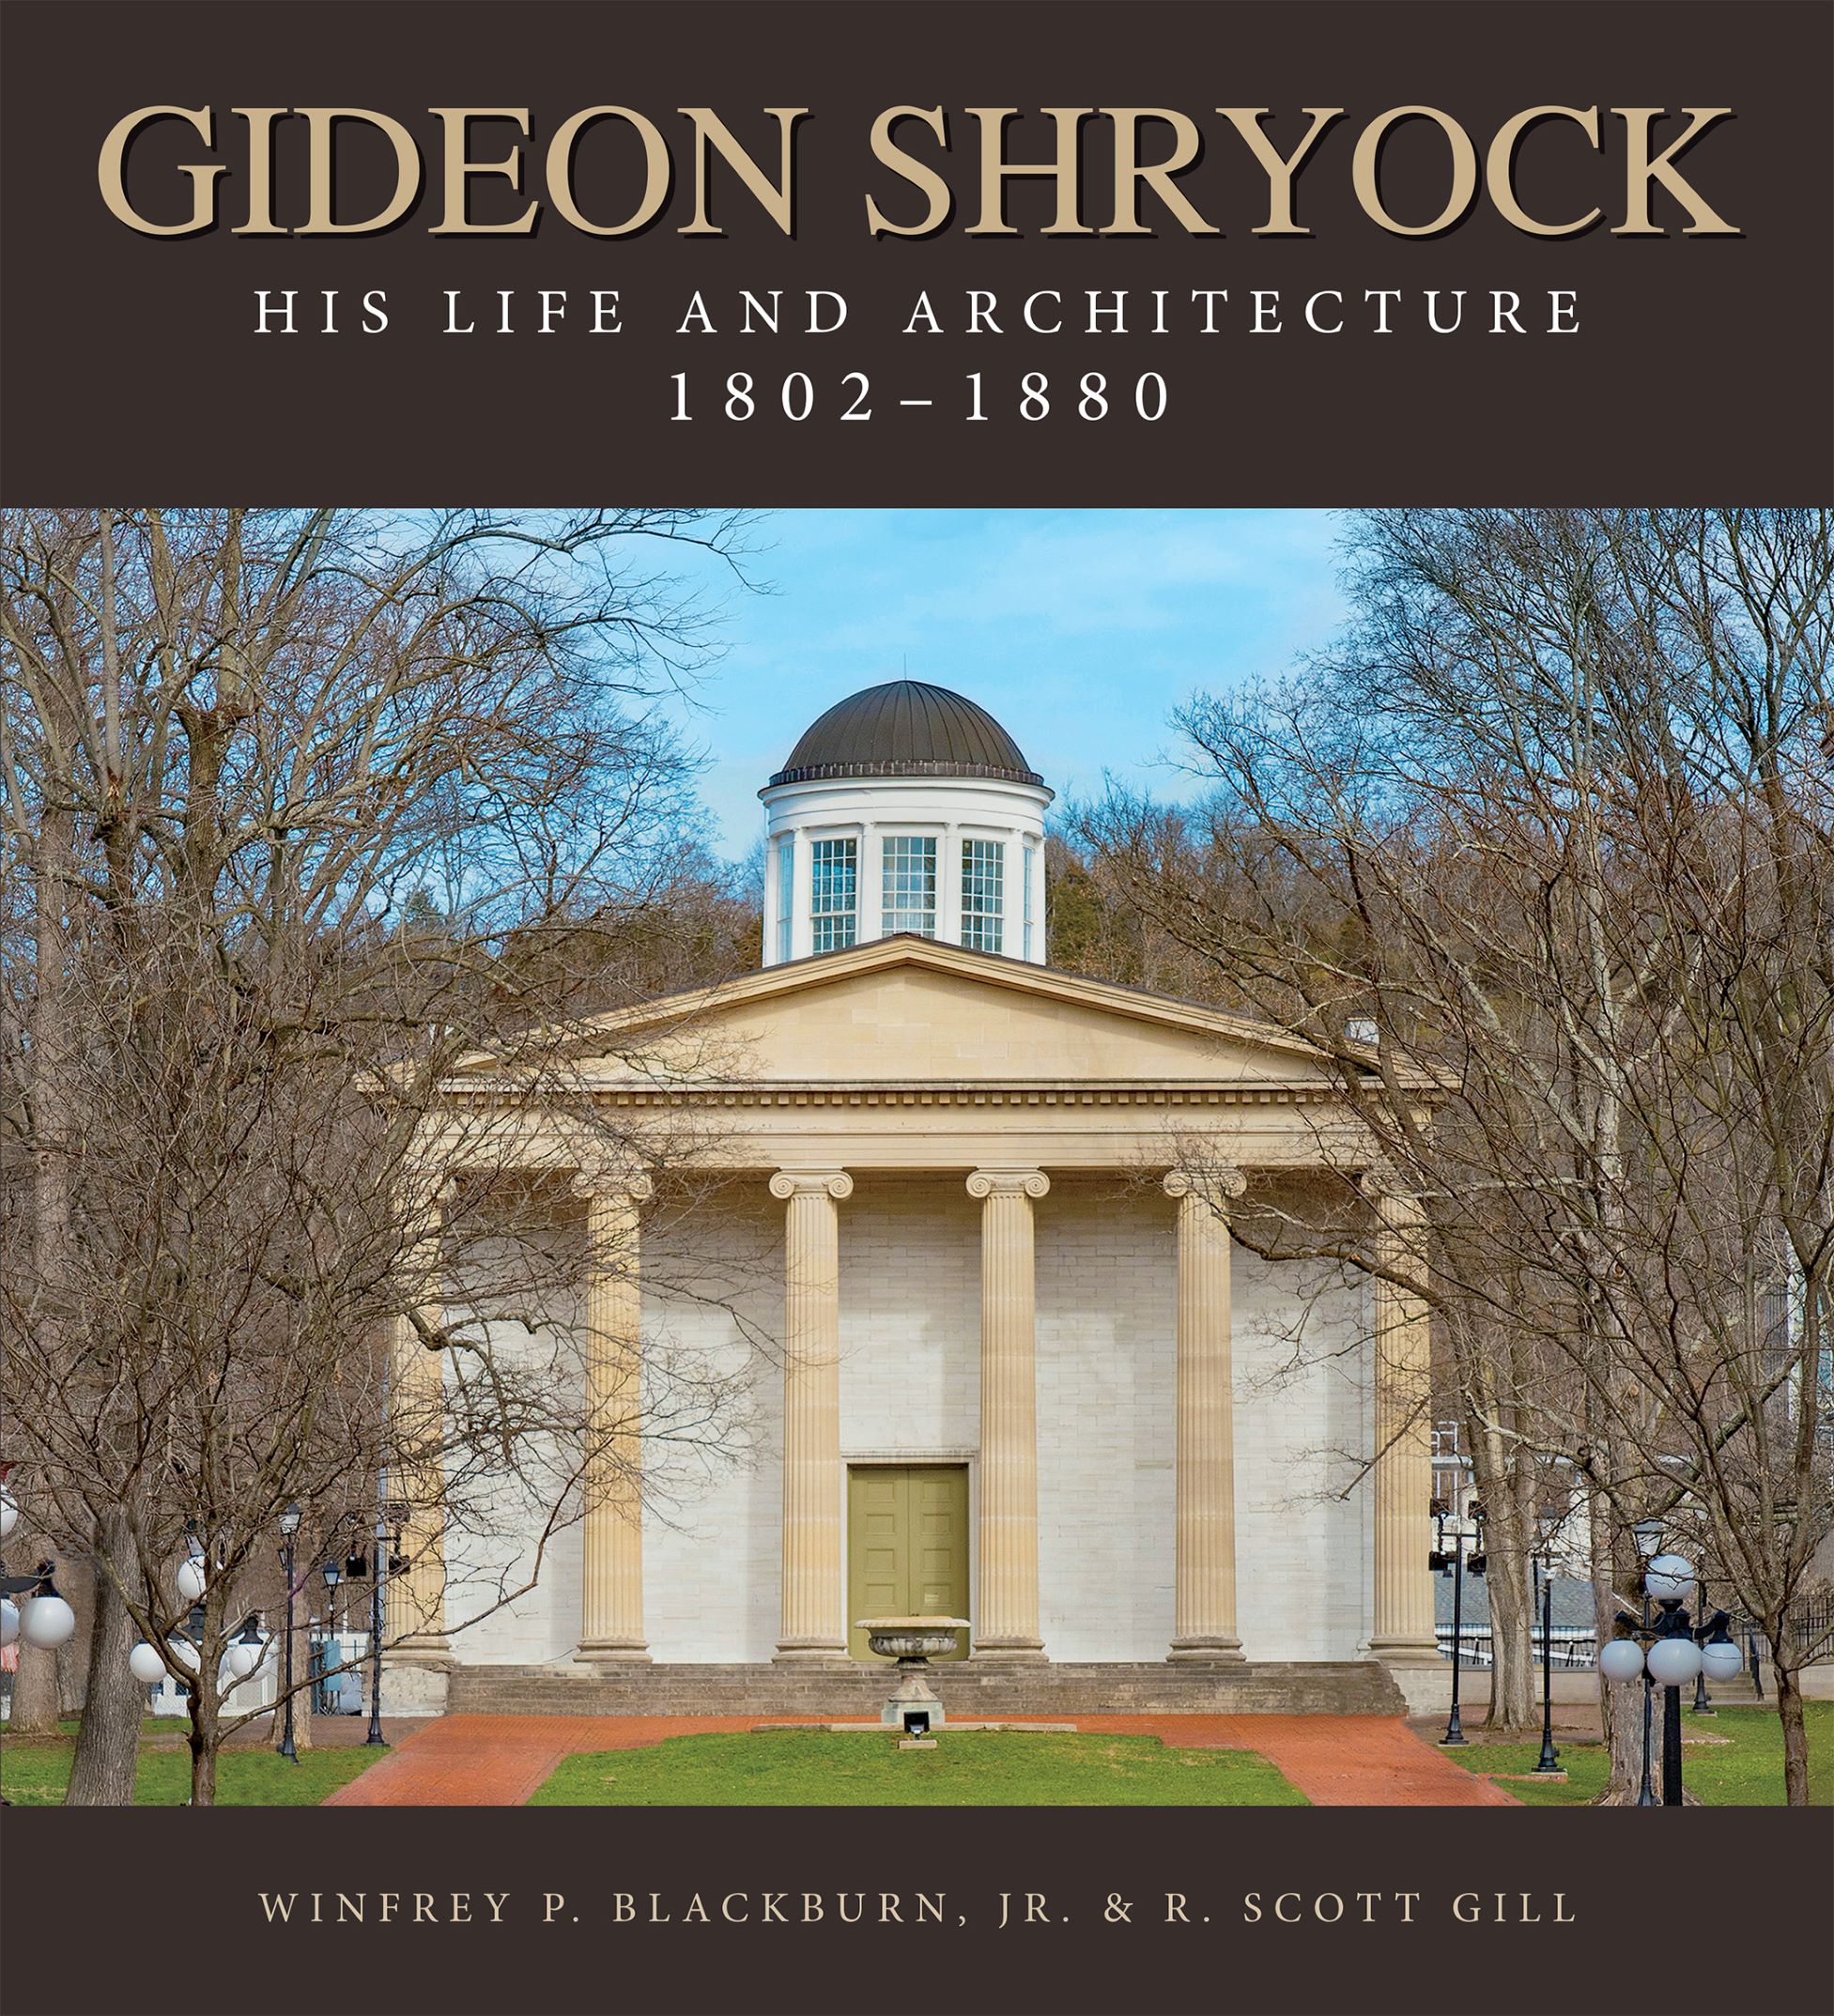 Gideon Shryock: His Life and Architecture, 1802-1880